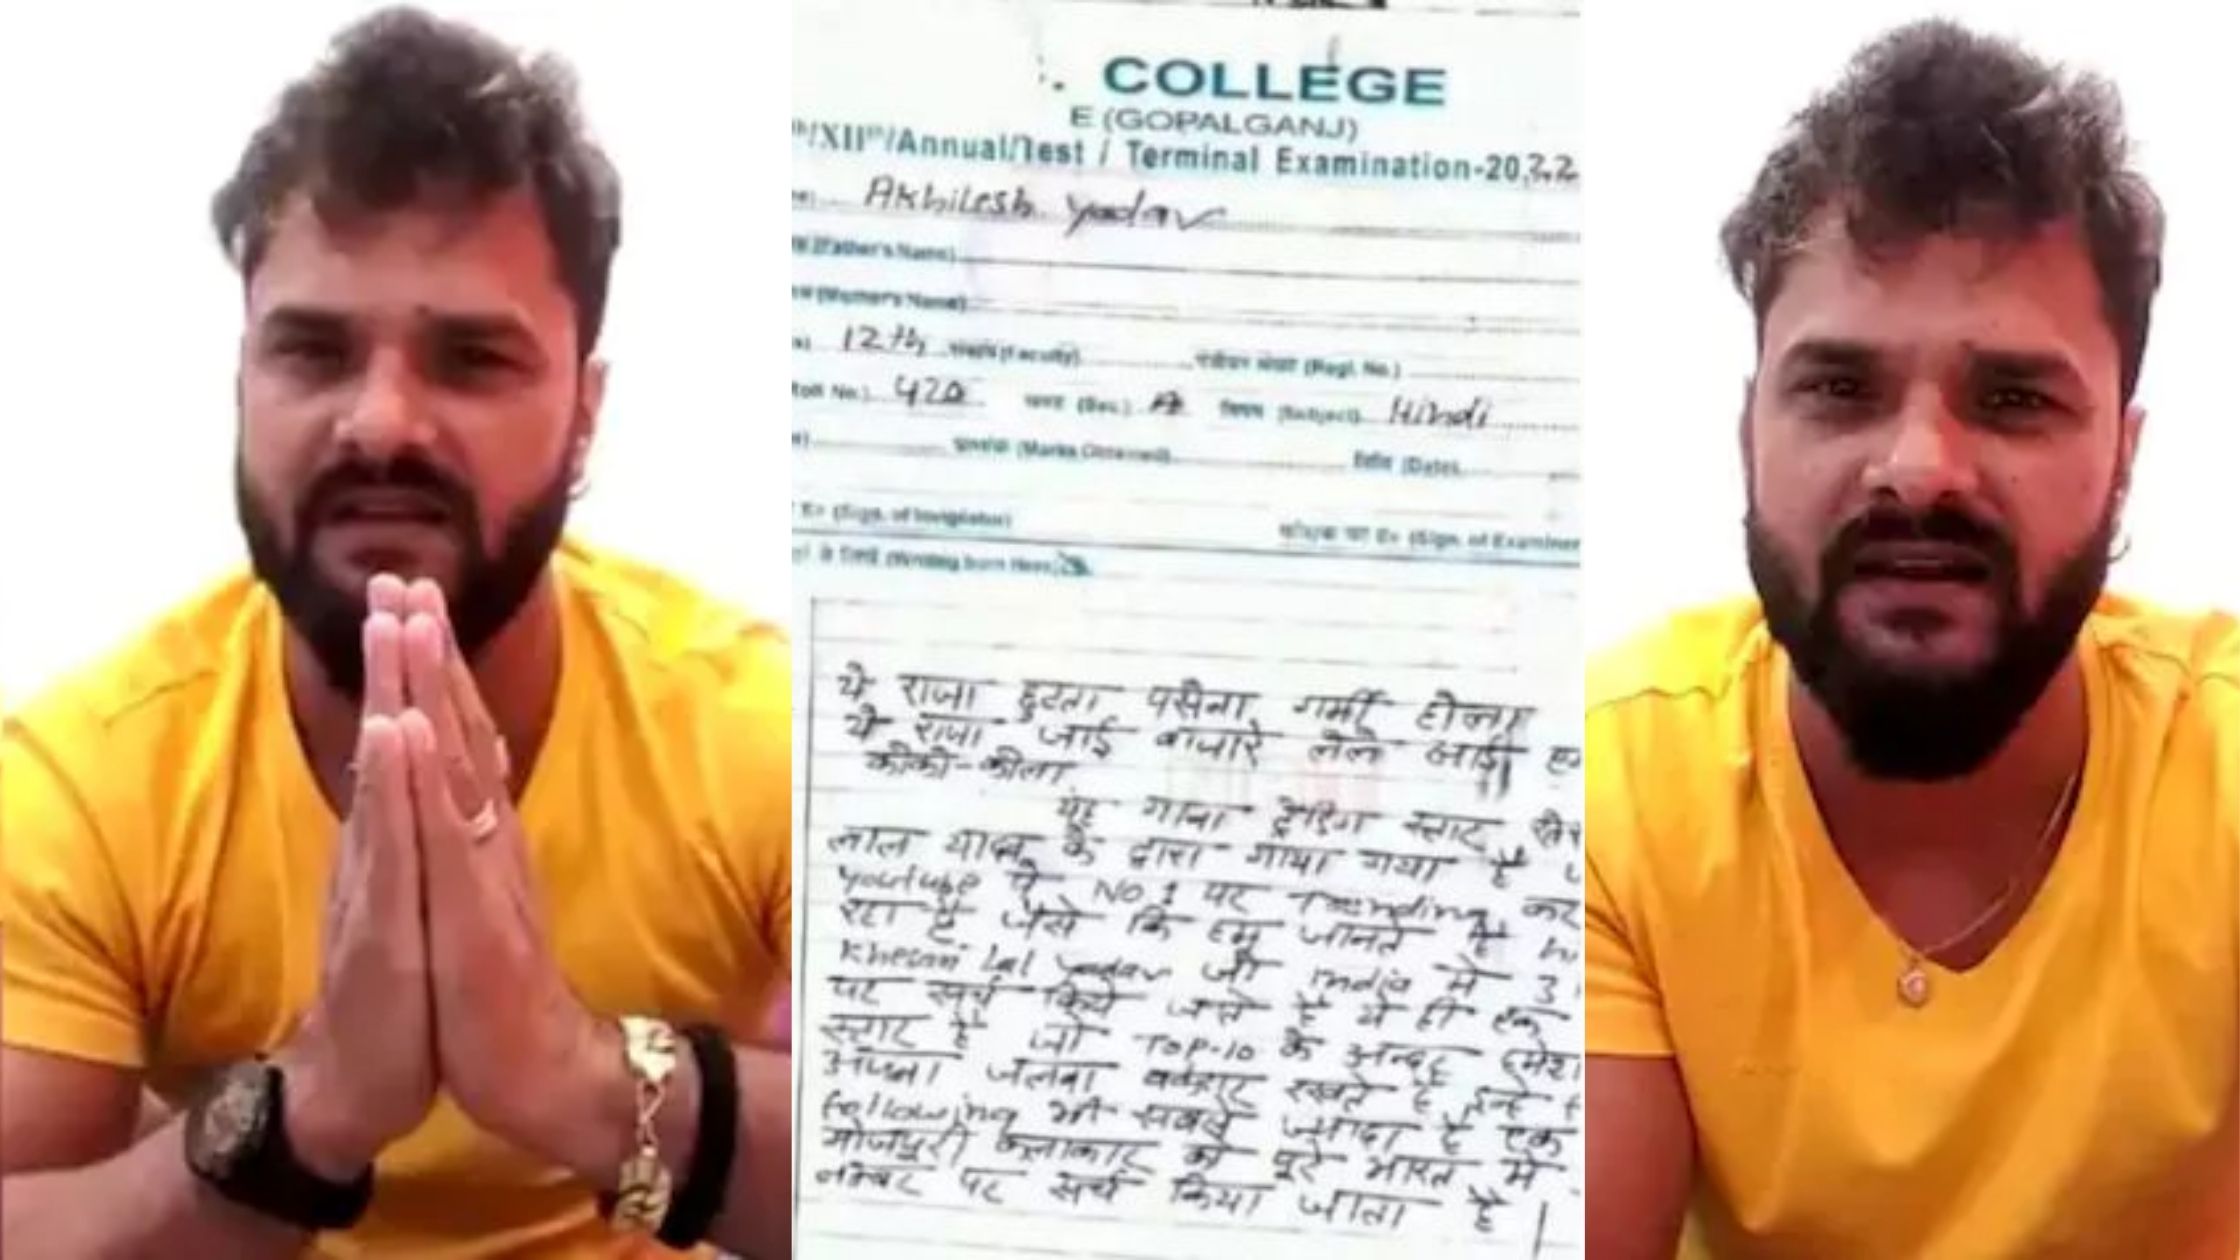 KHESARI LAL YADAV GUIDE AND SUGGEST STUDENT AFTER WRITING HIS FAMOUS COCO COLA SONG IN EXAM